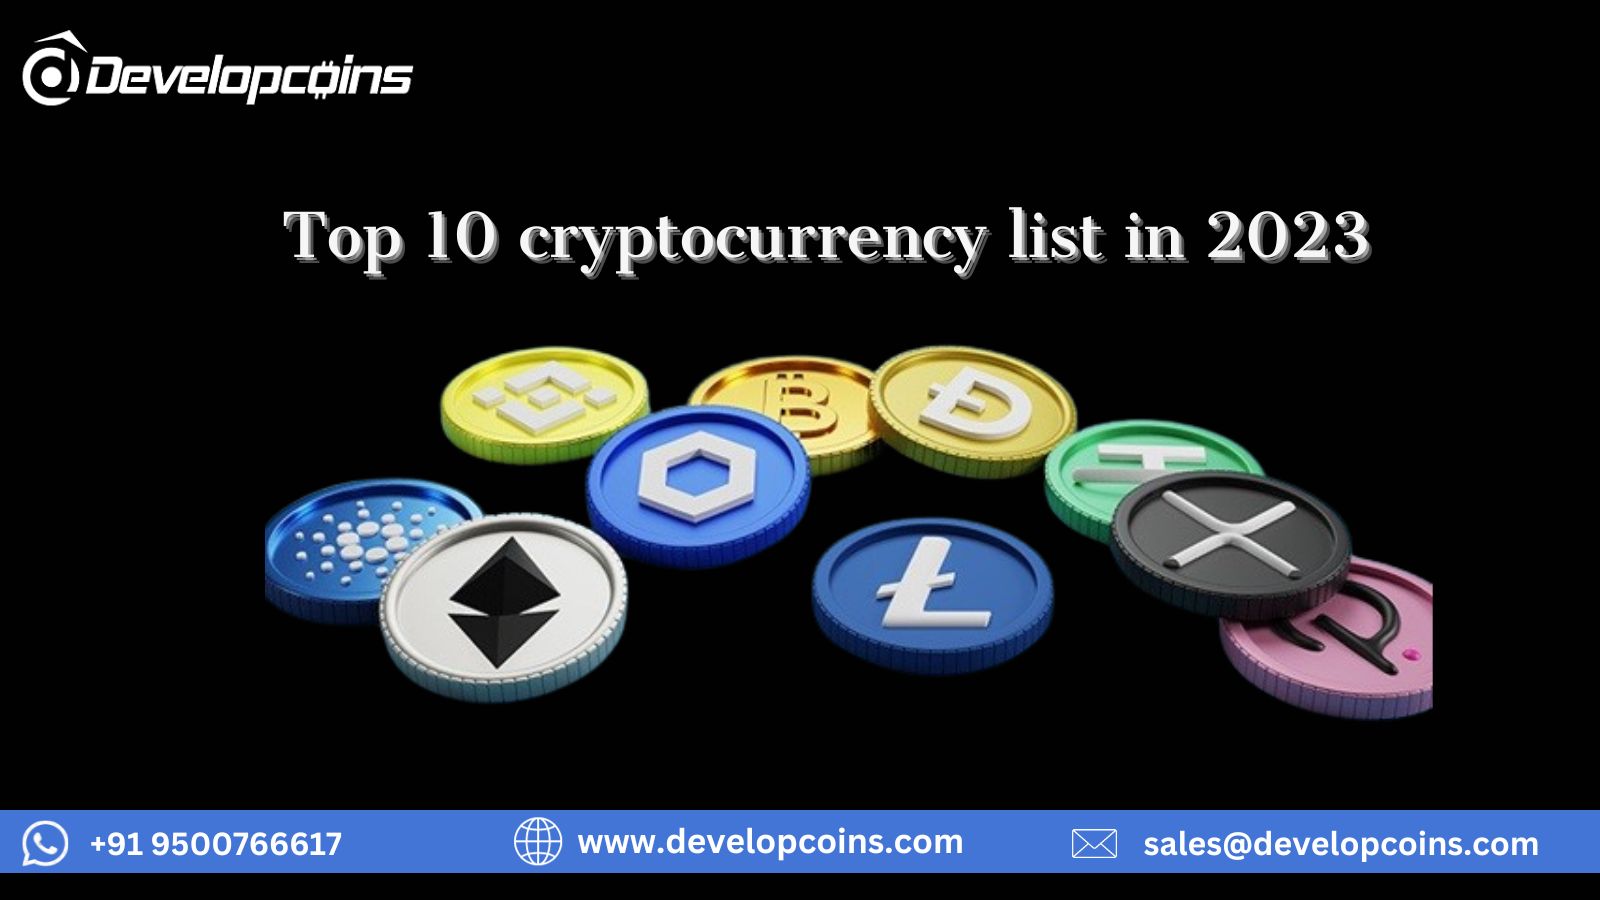 The Ultimate List of Top 10 Cryptocurrencies to Watch in 2023